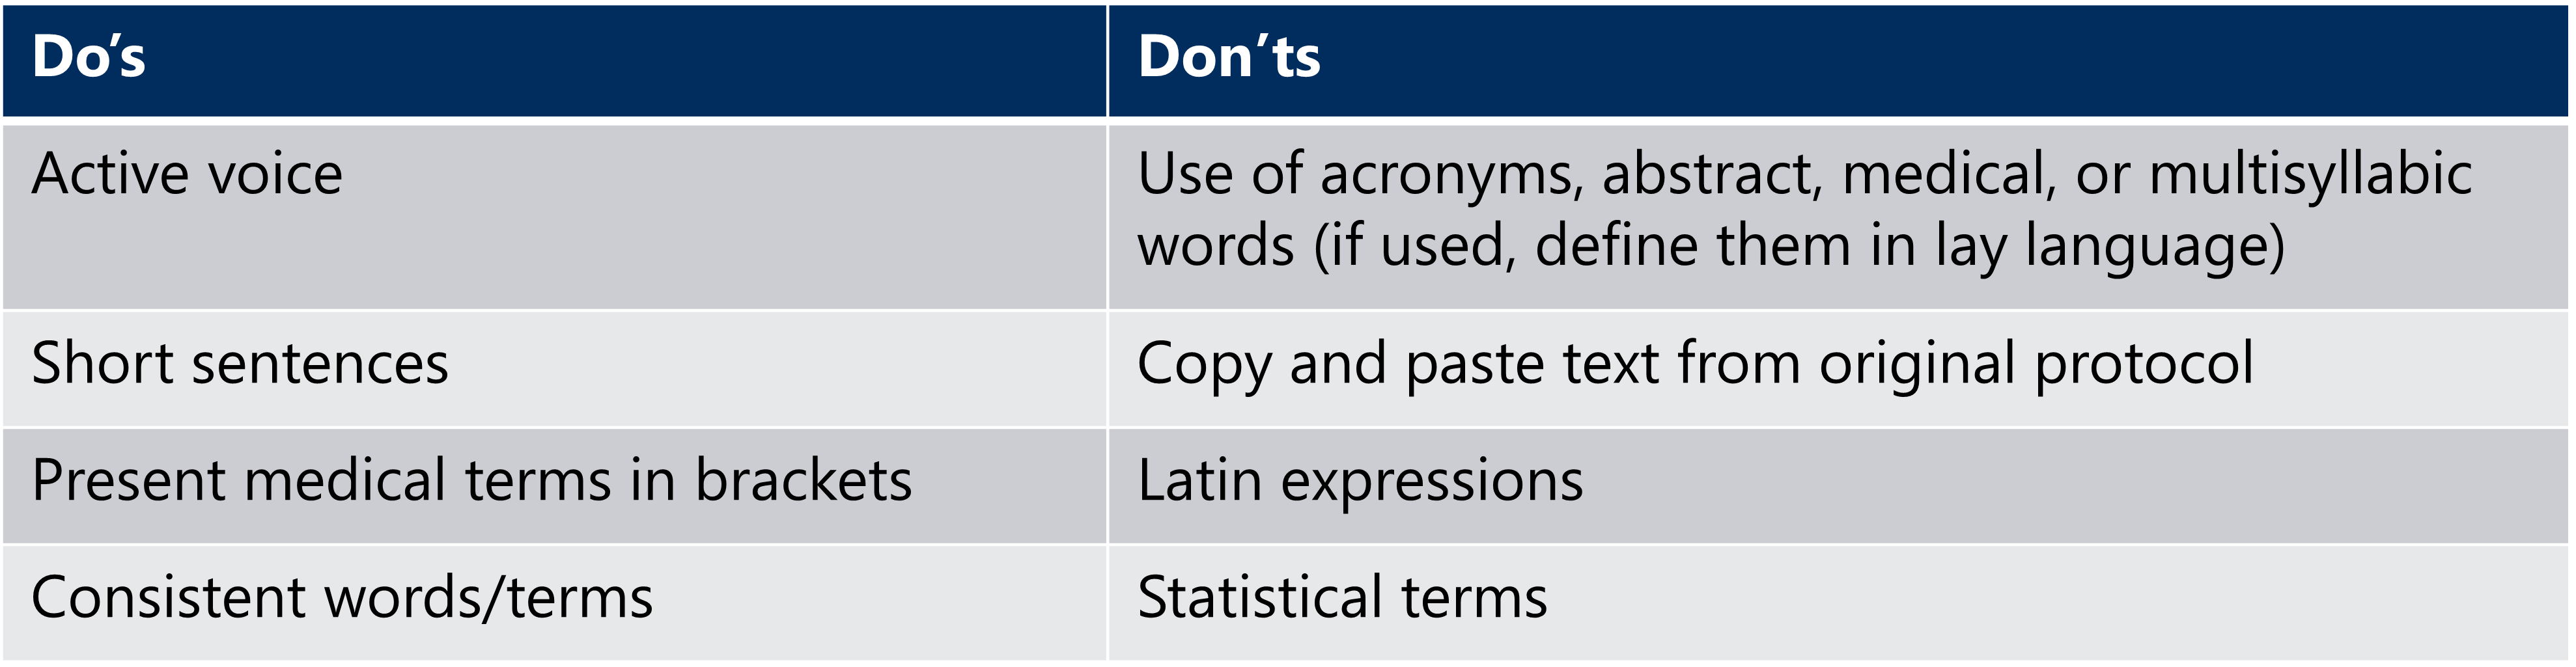 Do’s and Don’ts 